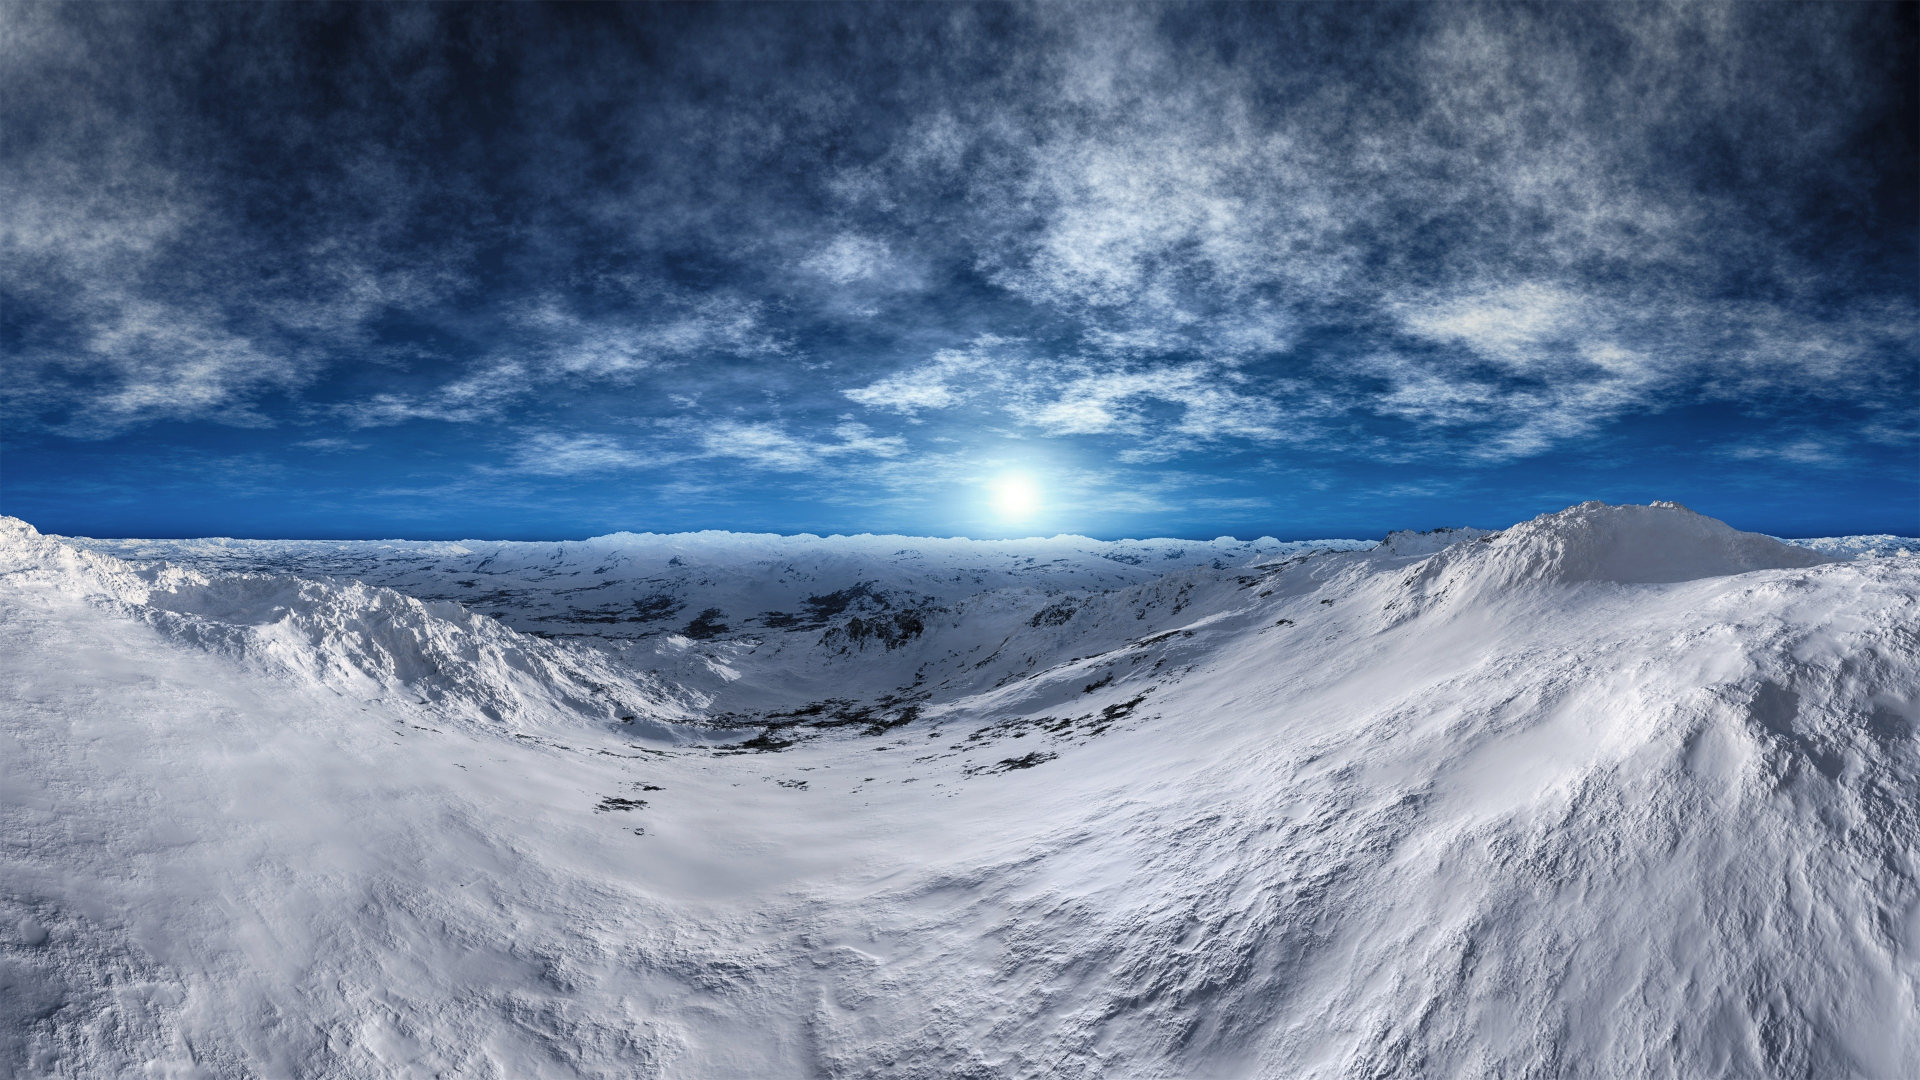 Download wallpaper 1920x1080 tundra, arctic, mountains, winter, sunny ...